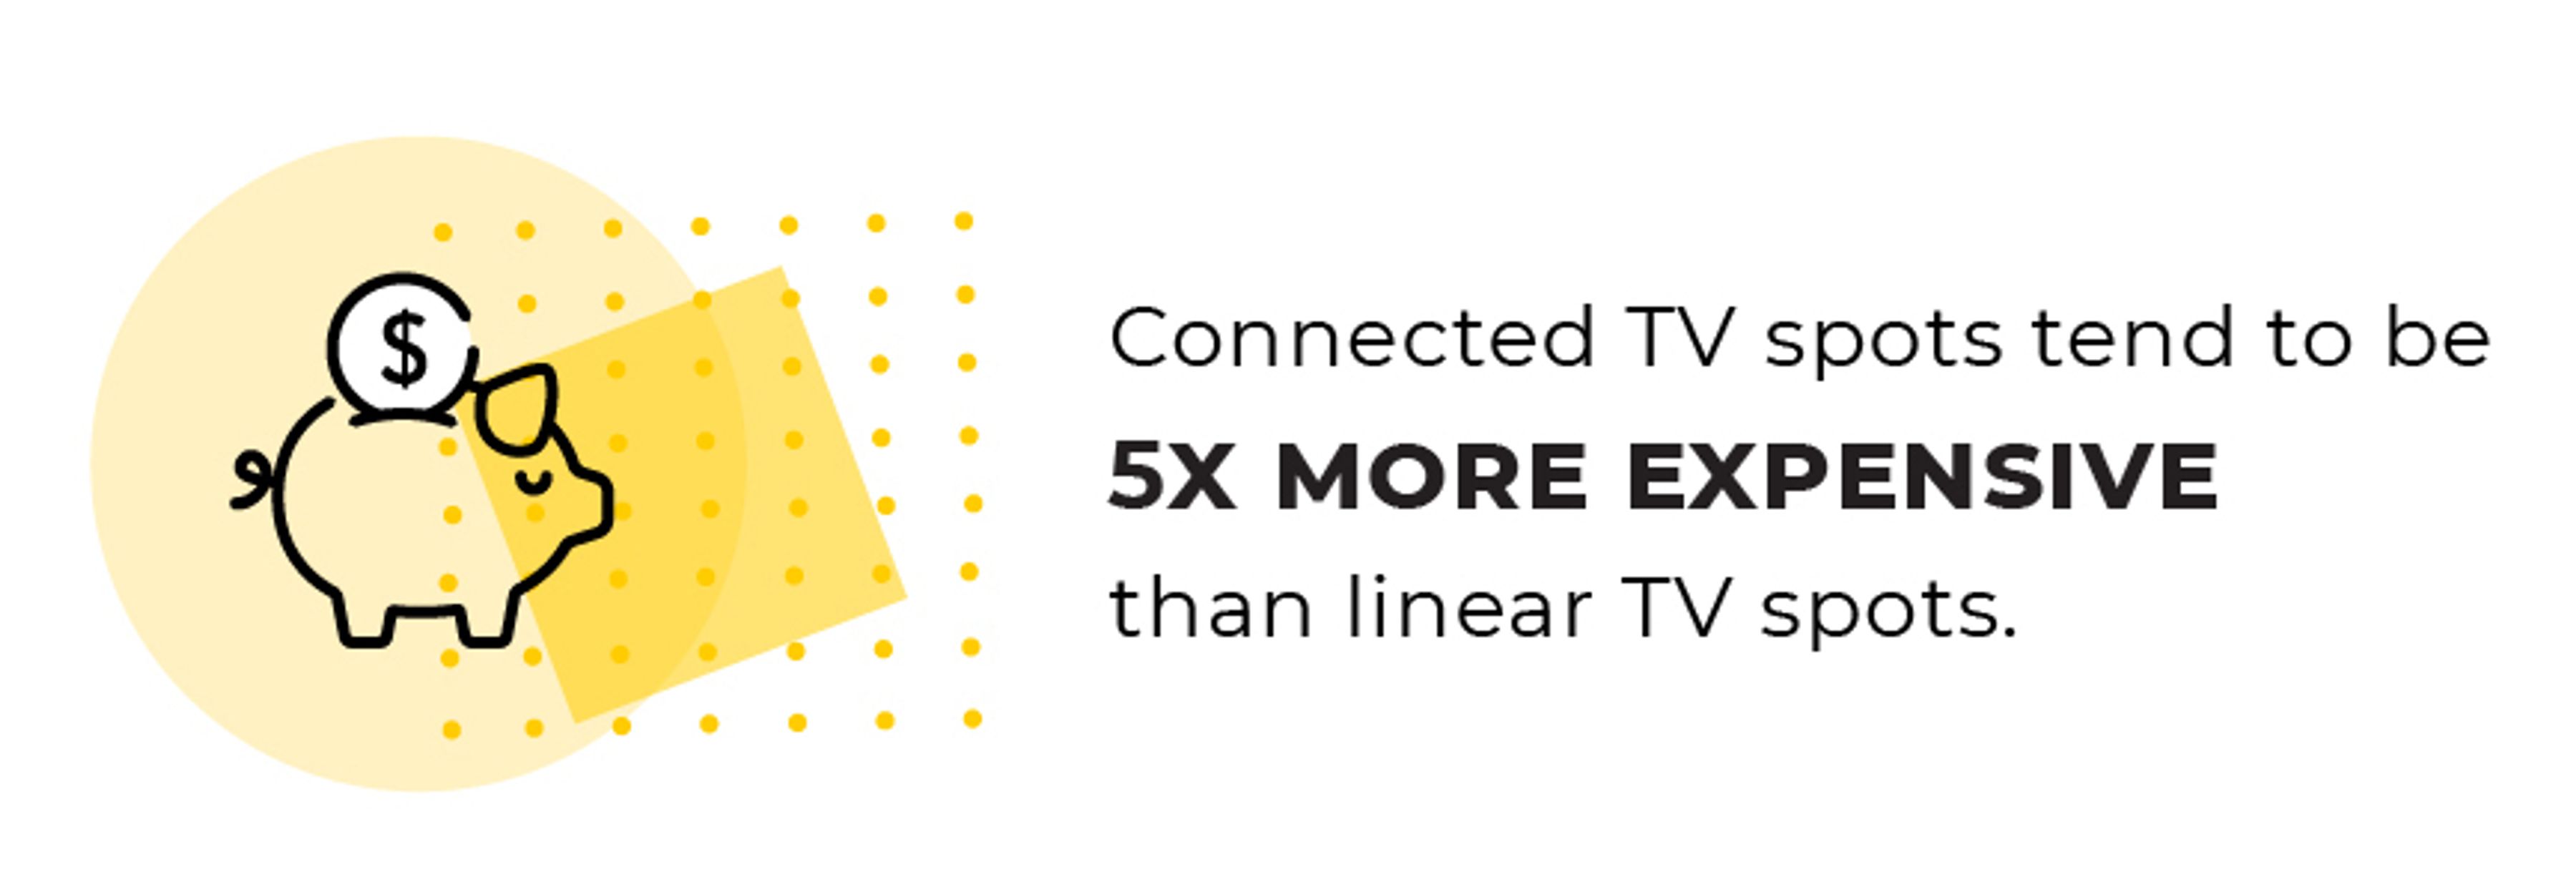 Connected TV spots tend to be 5x more expensive than linear TV spots.